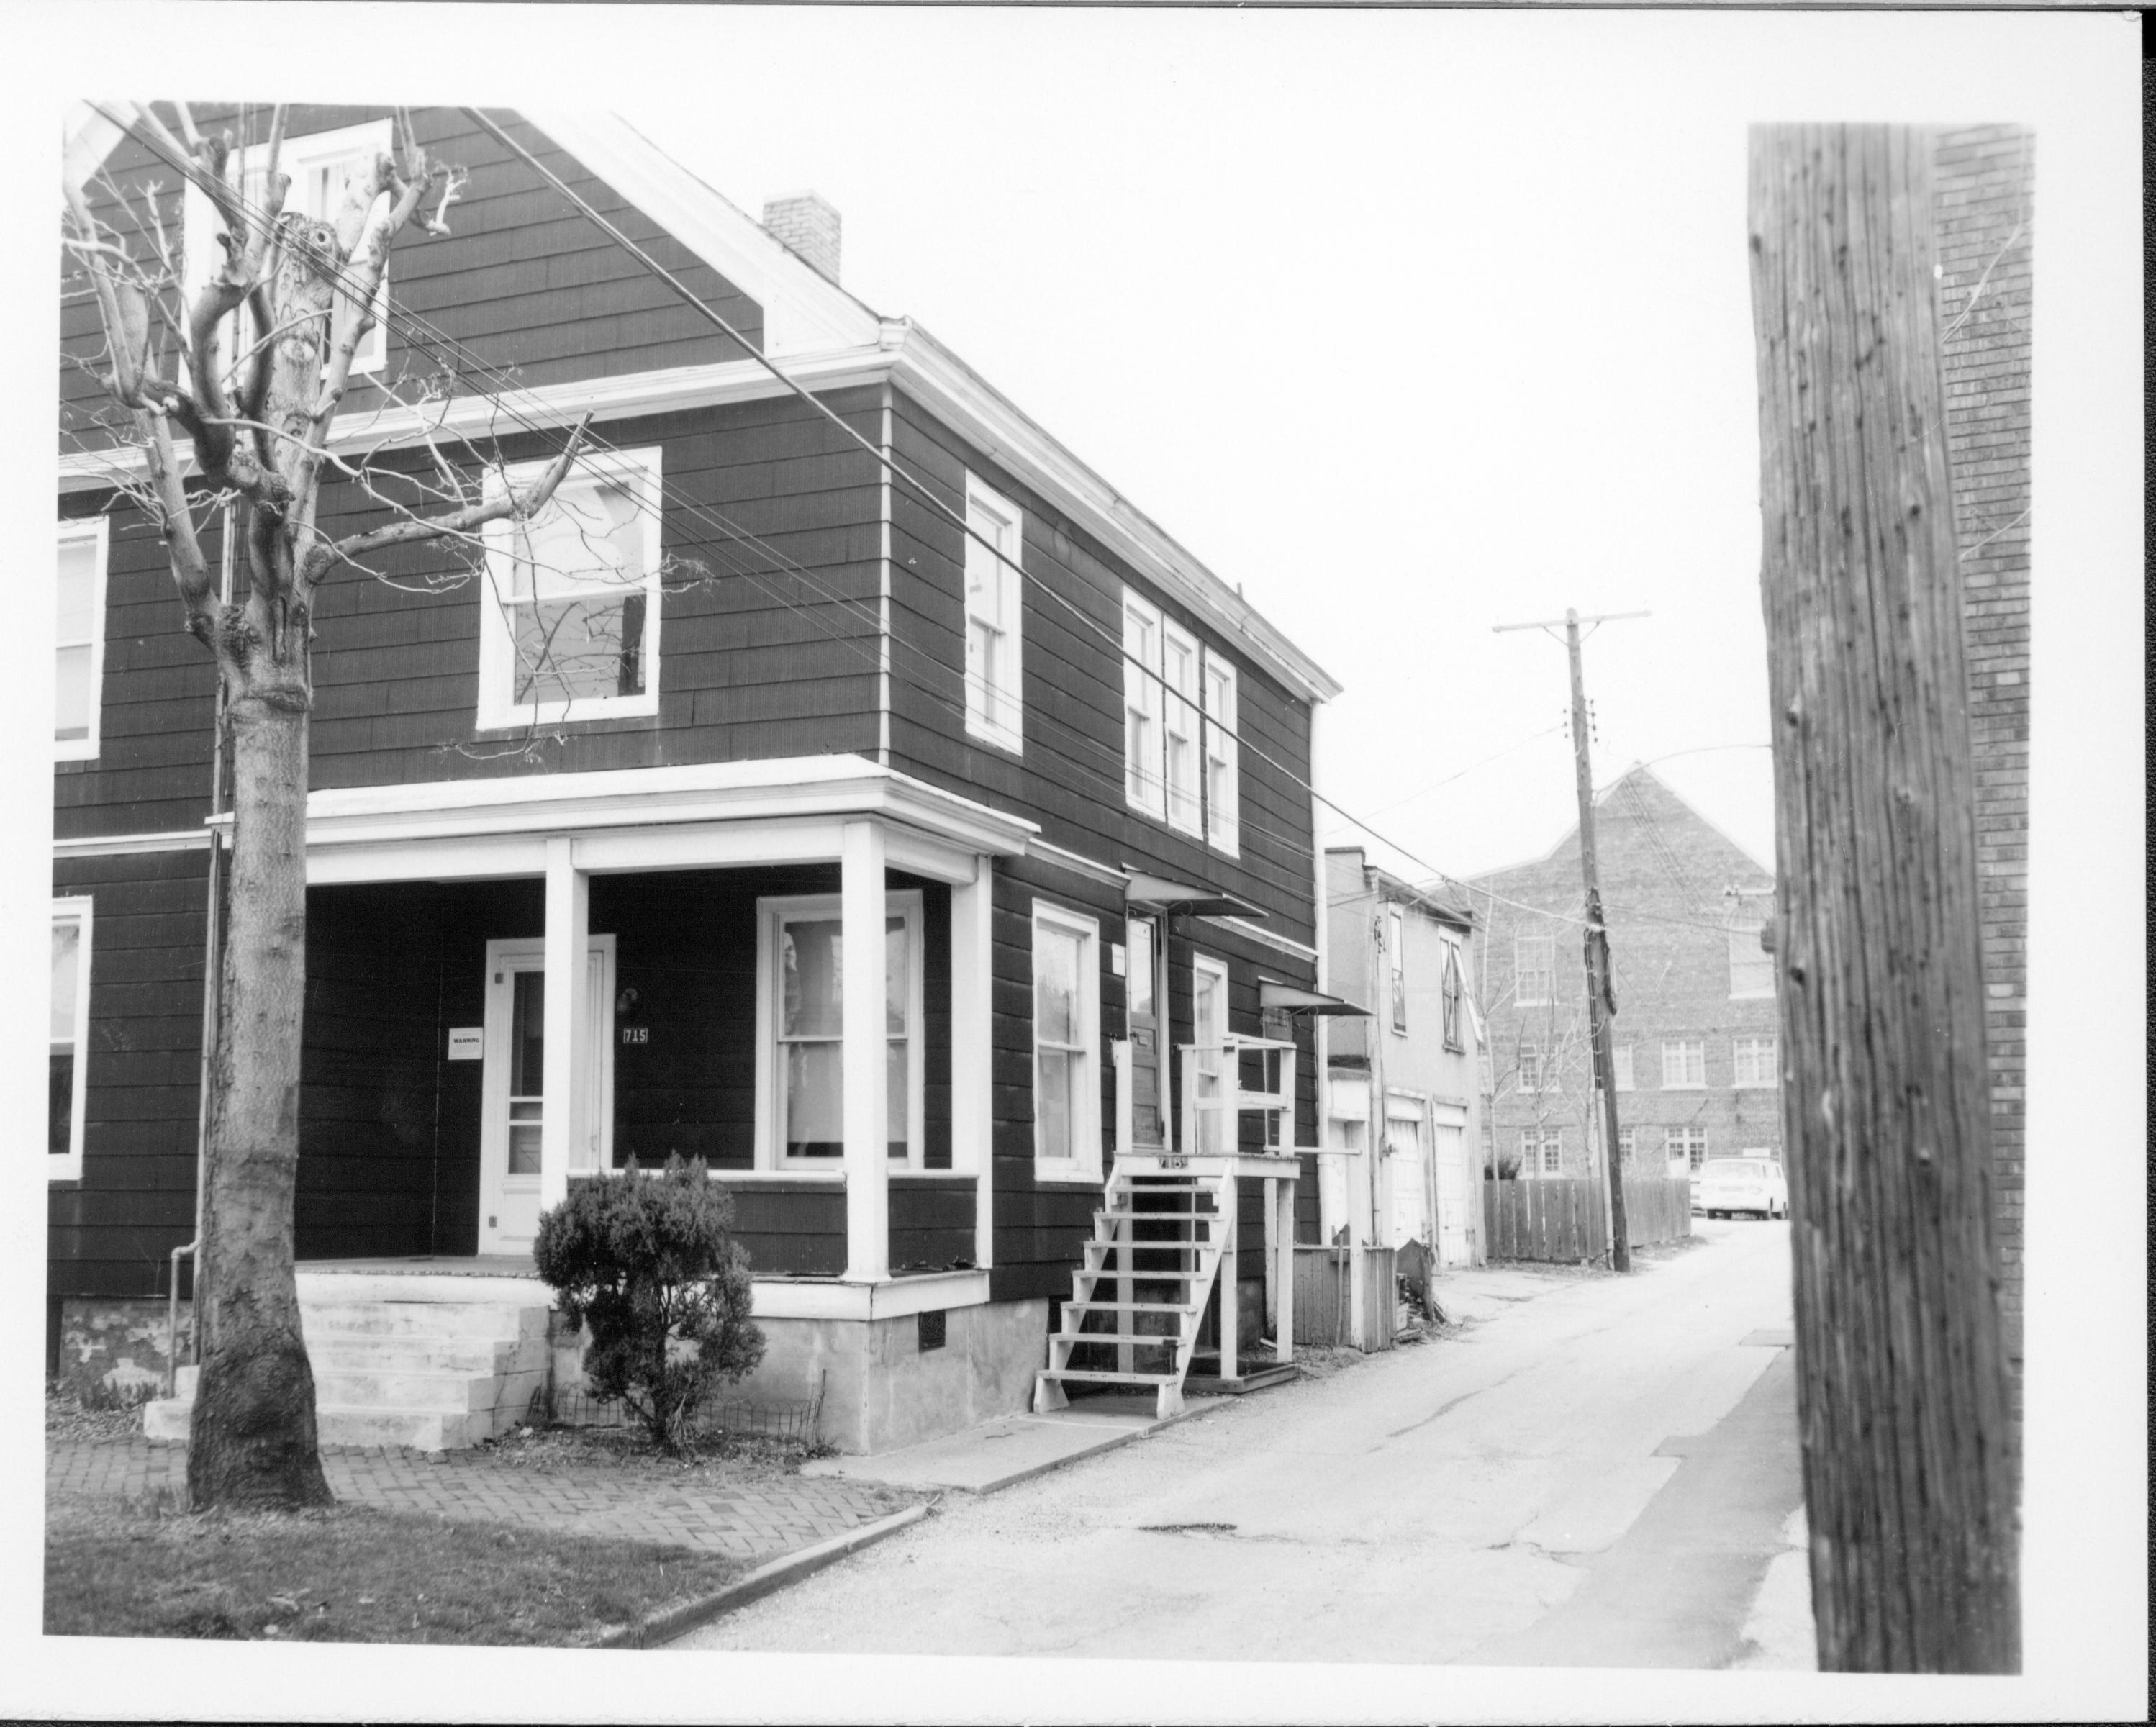 House owned by William Hermes in use as apartments, Block 7, Lot 8 along Jackson Street next to alley.  Two-story garage in center background owned by Eleanor Pruett, Grace Lutheran Church addition in background right. Area is now Visitor Center. Looking North/Northwest from Jackson Street and alley Hermes, Pruett, Grace Lutheran Church, Jackson Street, alley, Visitor Center